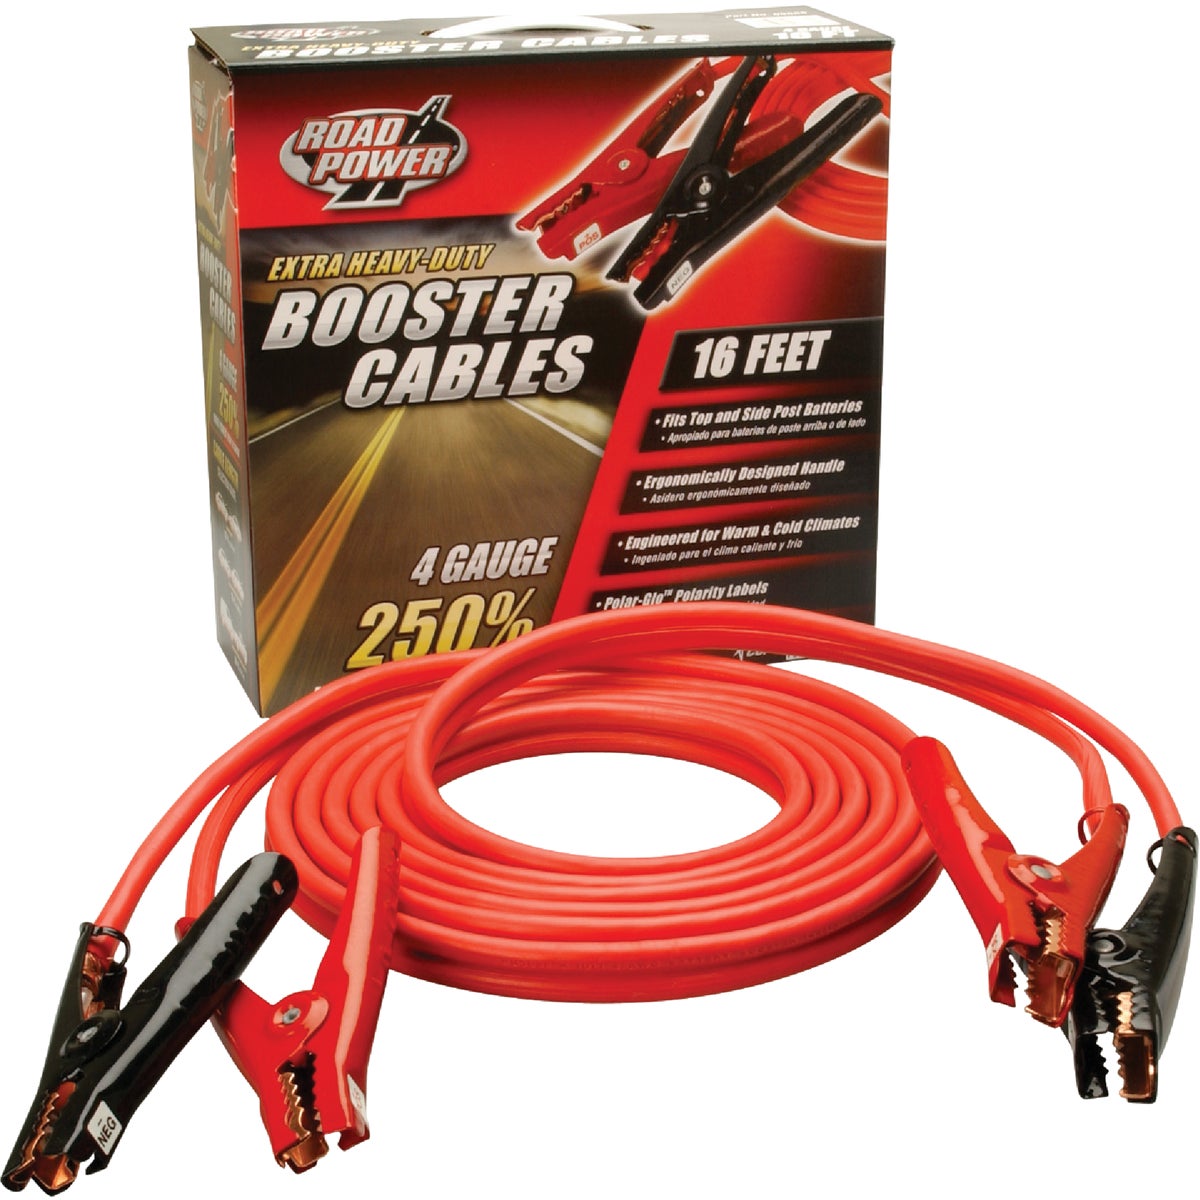 16' 4G BOOSTER CABLE